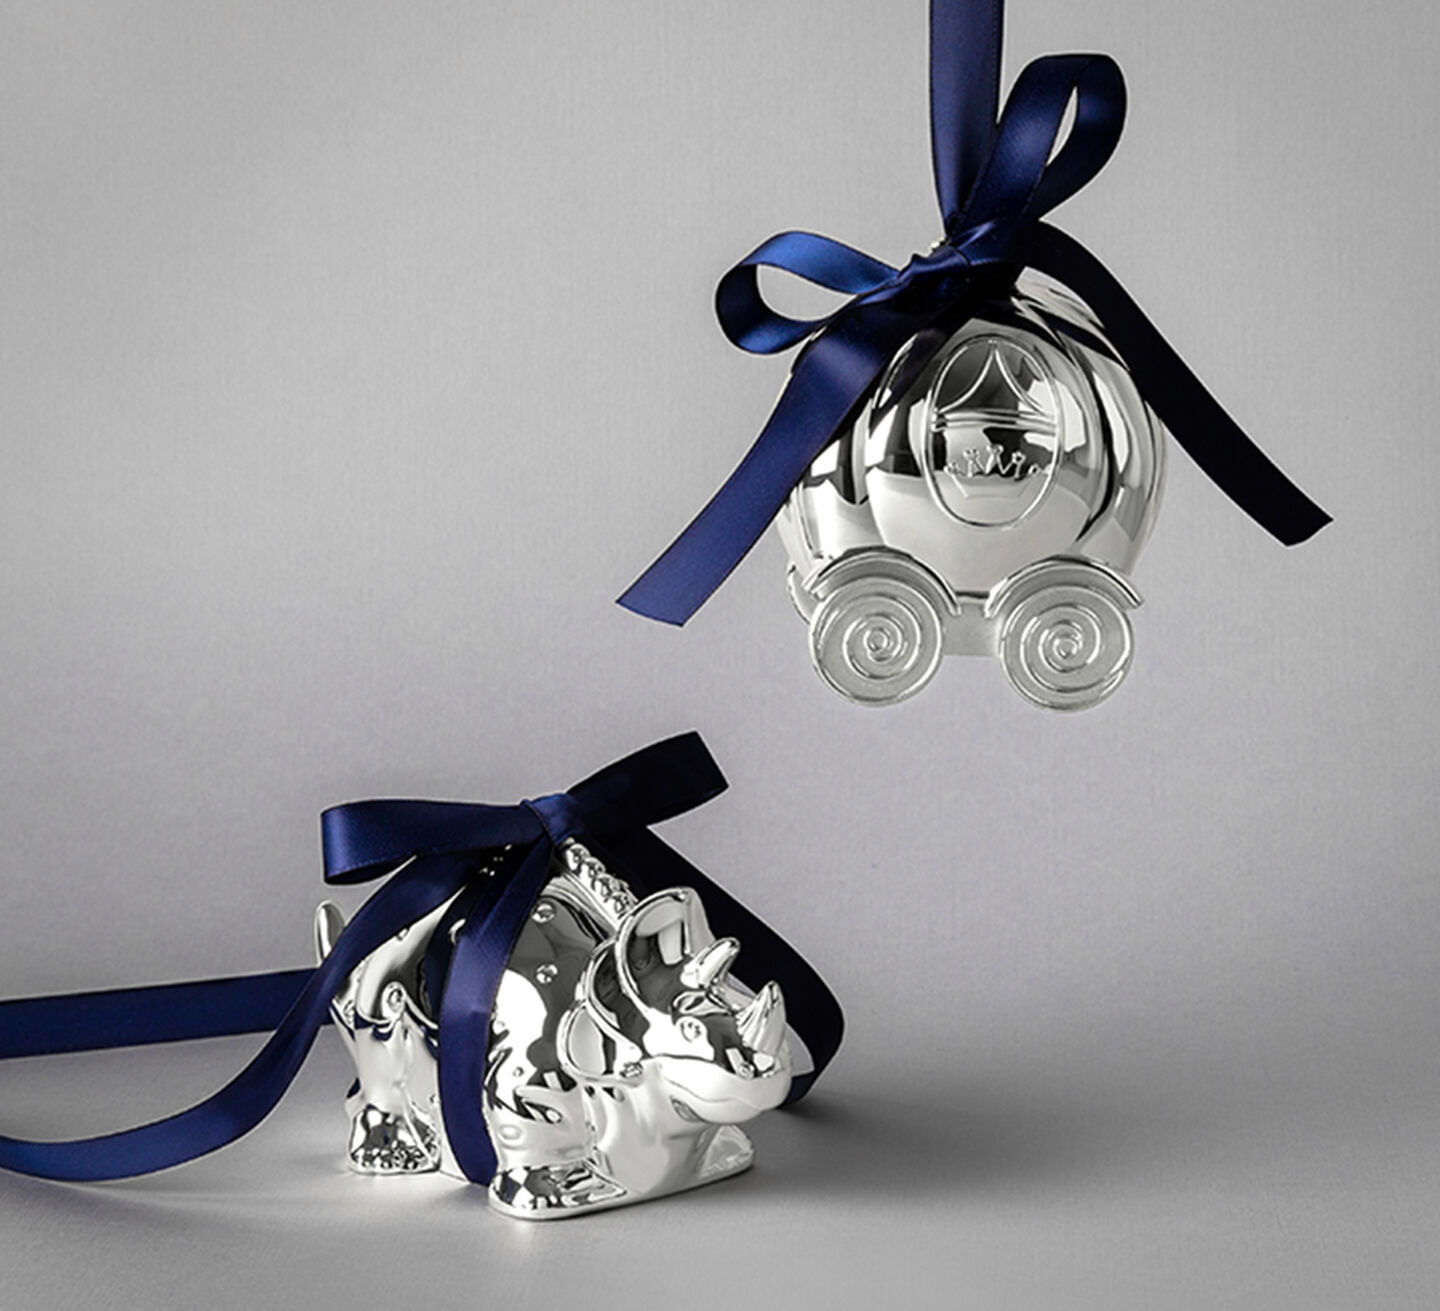 A silver triceratops and a pumpkin carriage both wrapped in blue ribbon